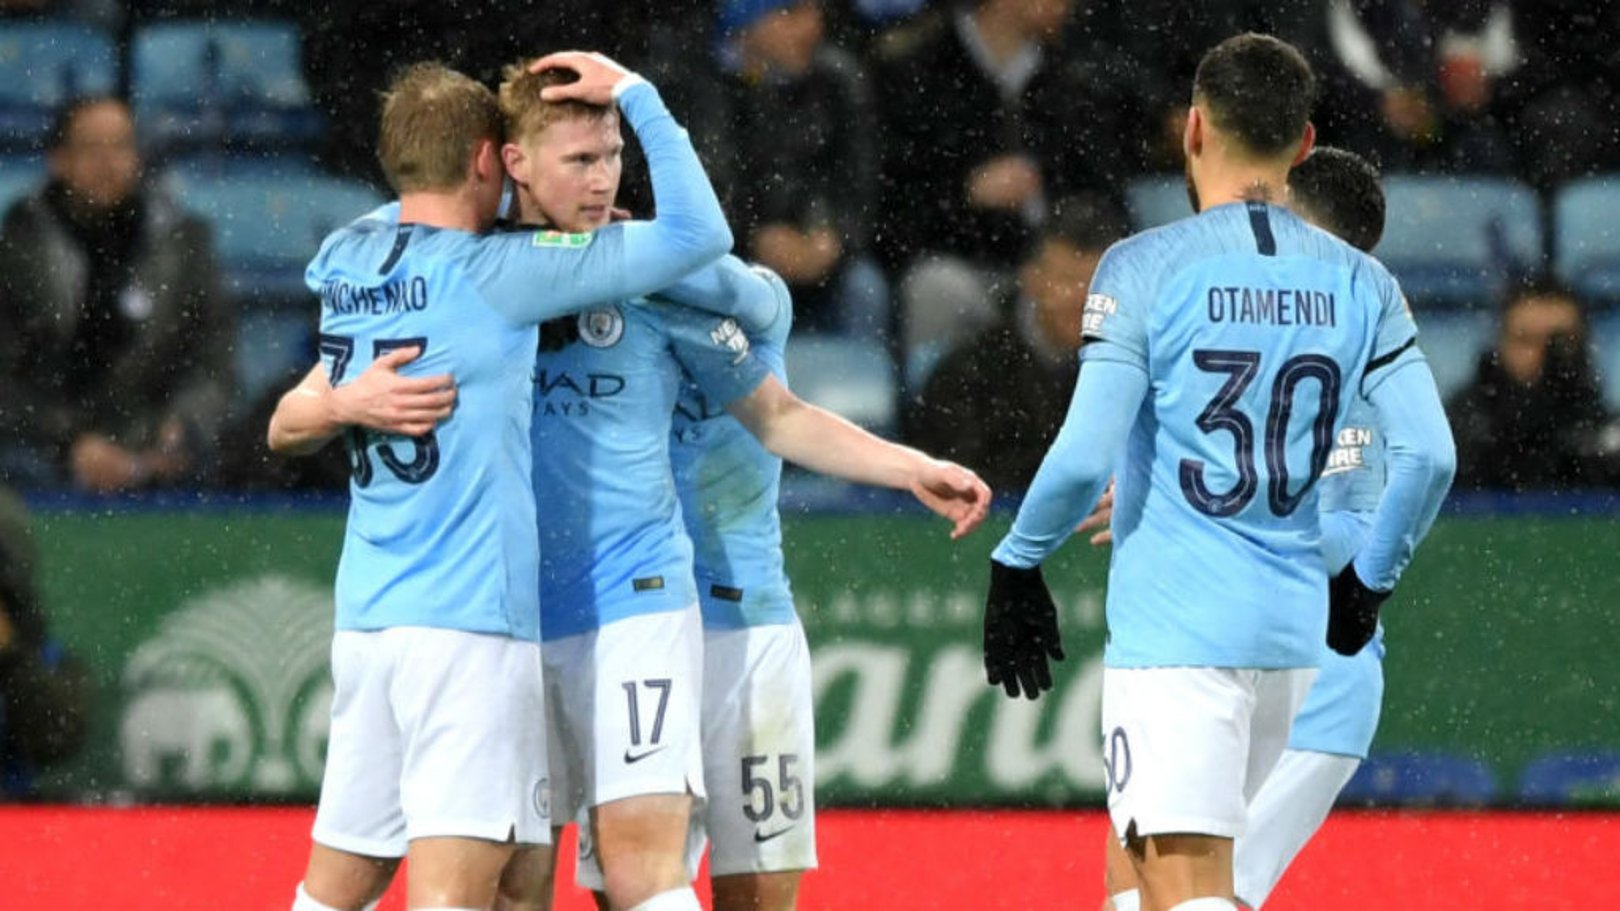 CELEBRATION TIME: Kevin De Bruyne and his colleagues are all smiles after his stunning strike